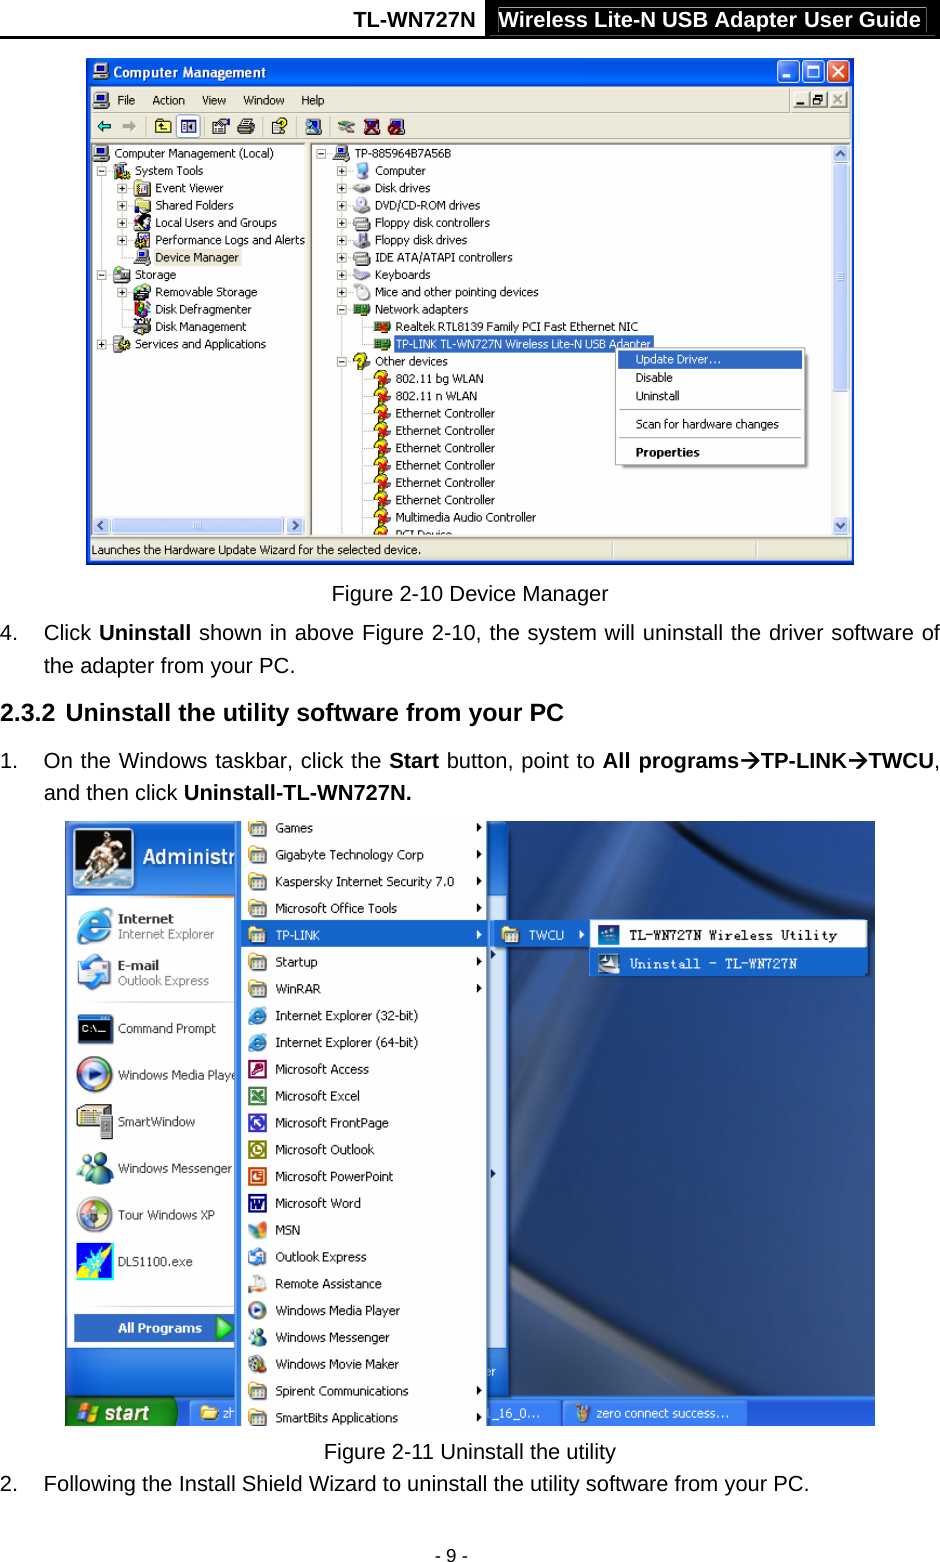 TL-WN727N Wireless Lite-N USB Adapter User Guide - 9 -  Figure 2-10 Device Manager 4. Click Uninstall shown in above Figure 2-10, the system will uninstall the driver software of the adapter from your PC. 2.3.2 Uninstall the utility software from your PC   1.  On the Windows taskbar, click the Start button, point to All programsÆTP-LINKÆTWCU, and then click Uninstall-TL-WN727N.   Figure 2-11 Uninstall the utility 2.  Following the Install Shield Wizard to uninstall the utility software from your PC. 